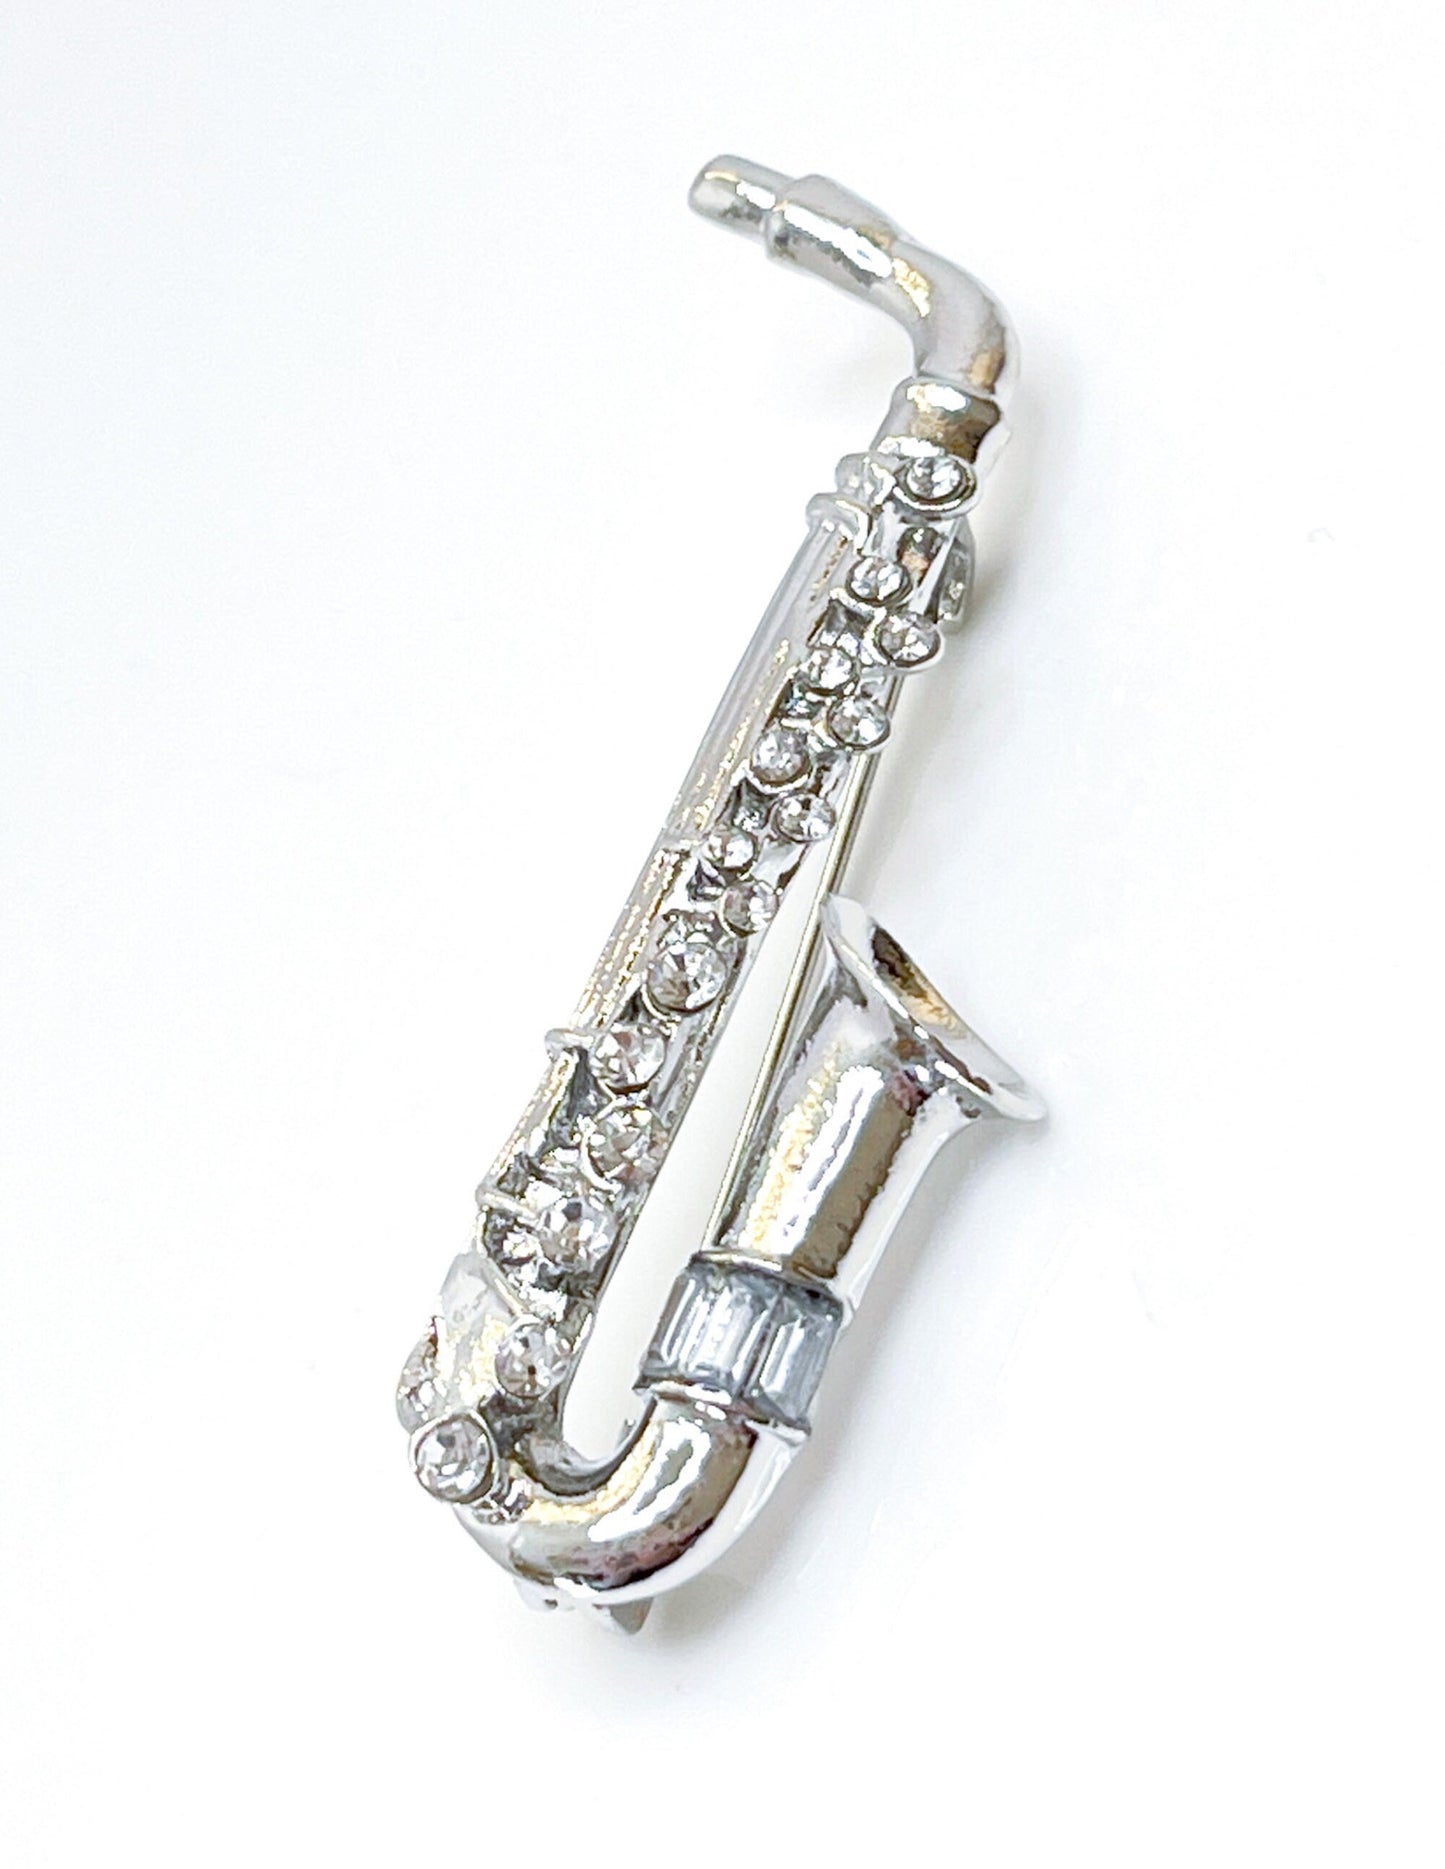 Silver Saxophone Brooch with Crystals | Fashion Brooch | Music Lovers Brooch